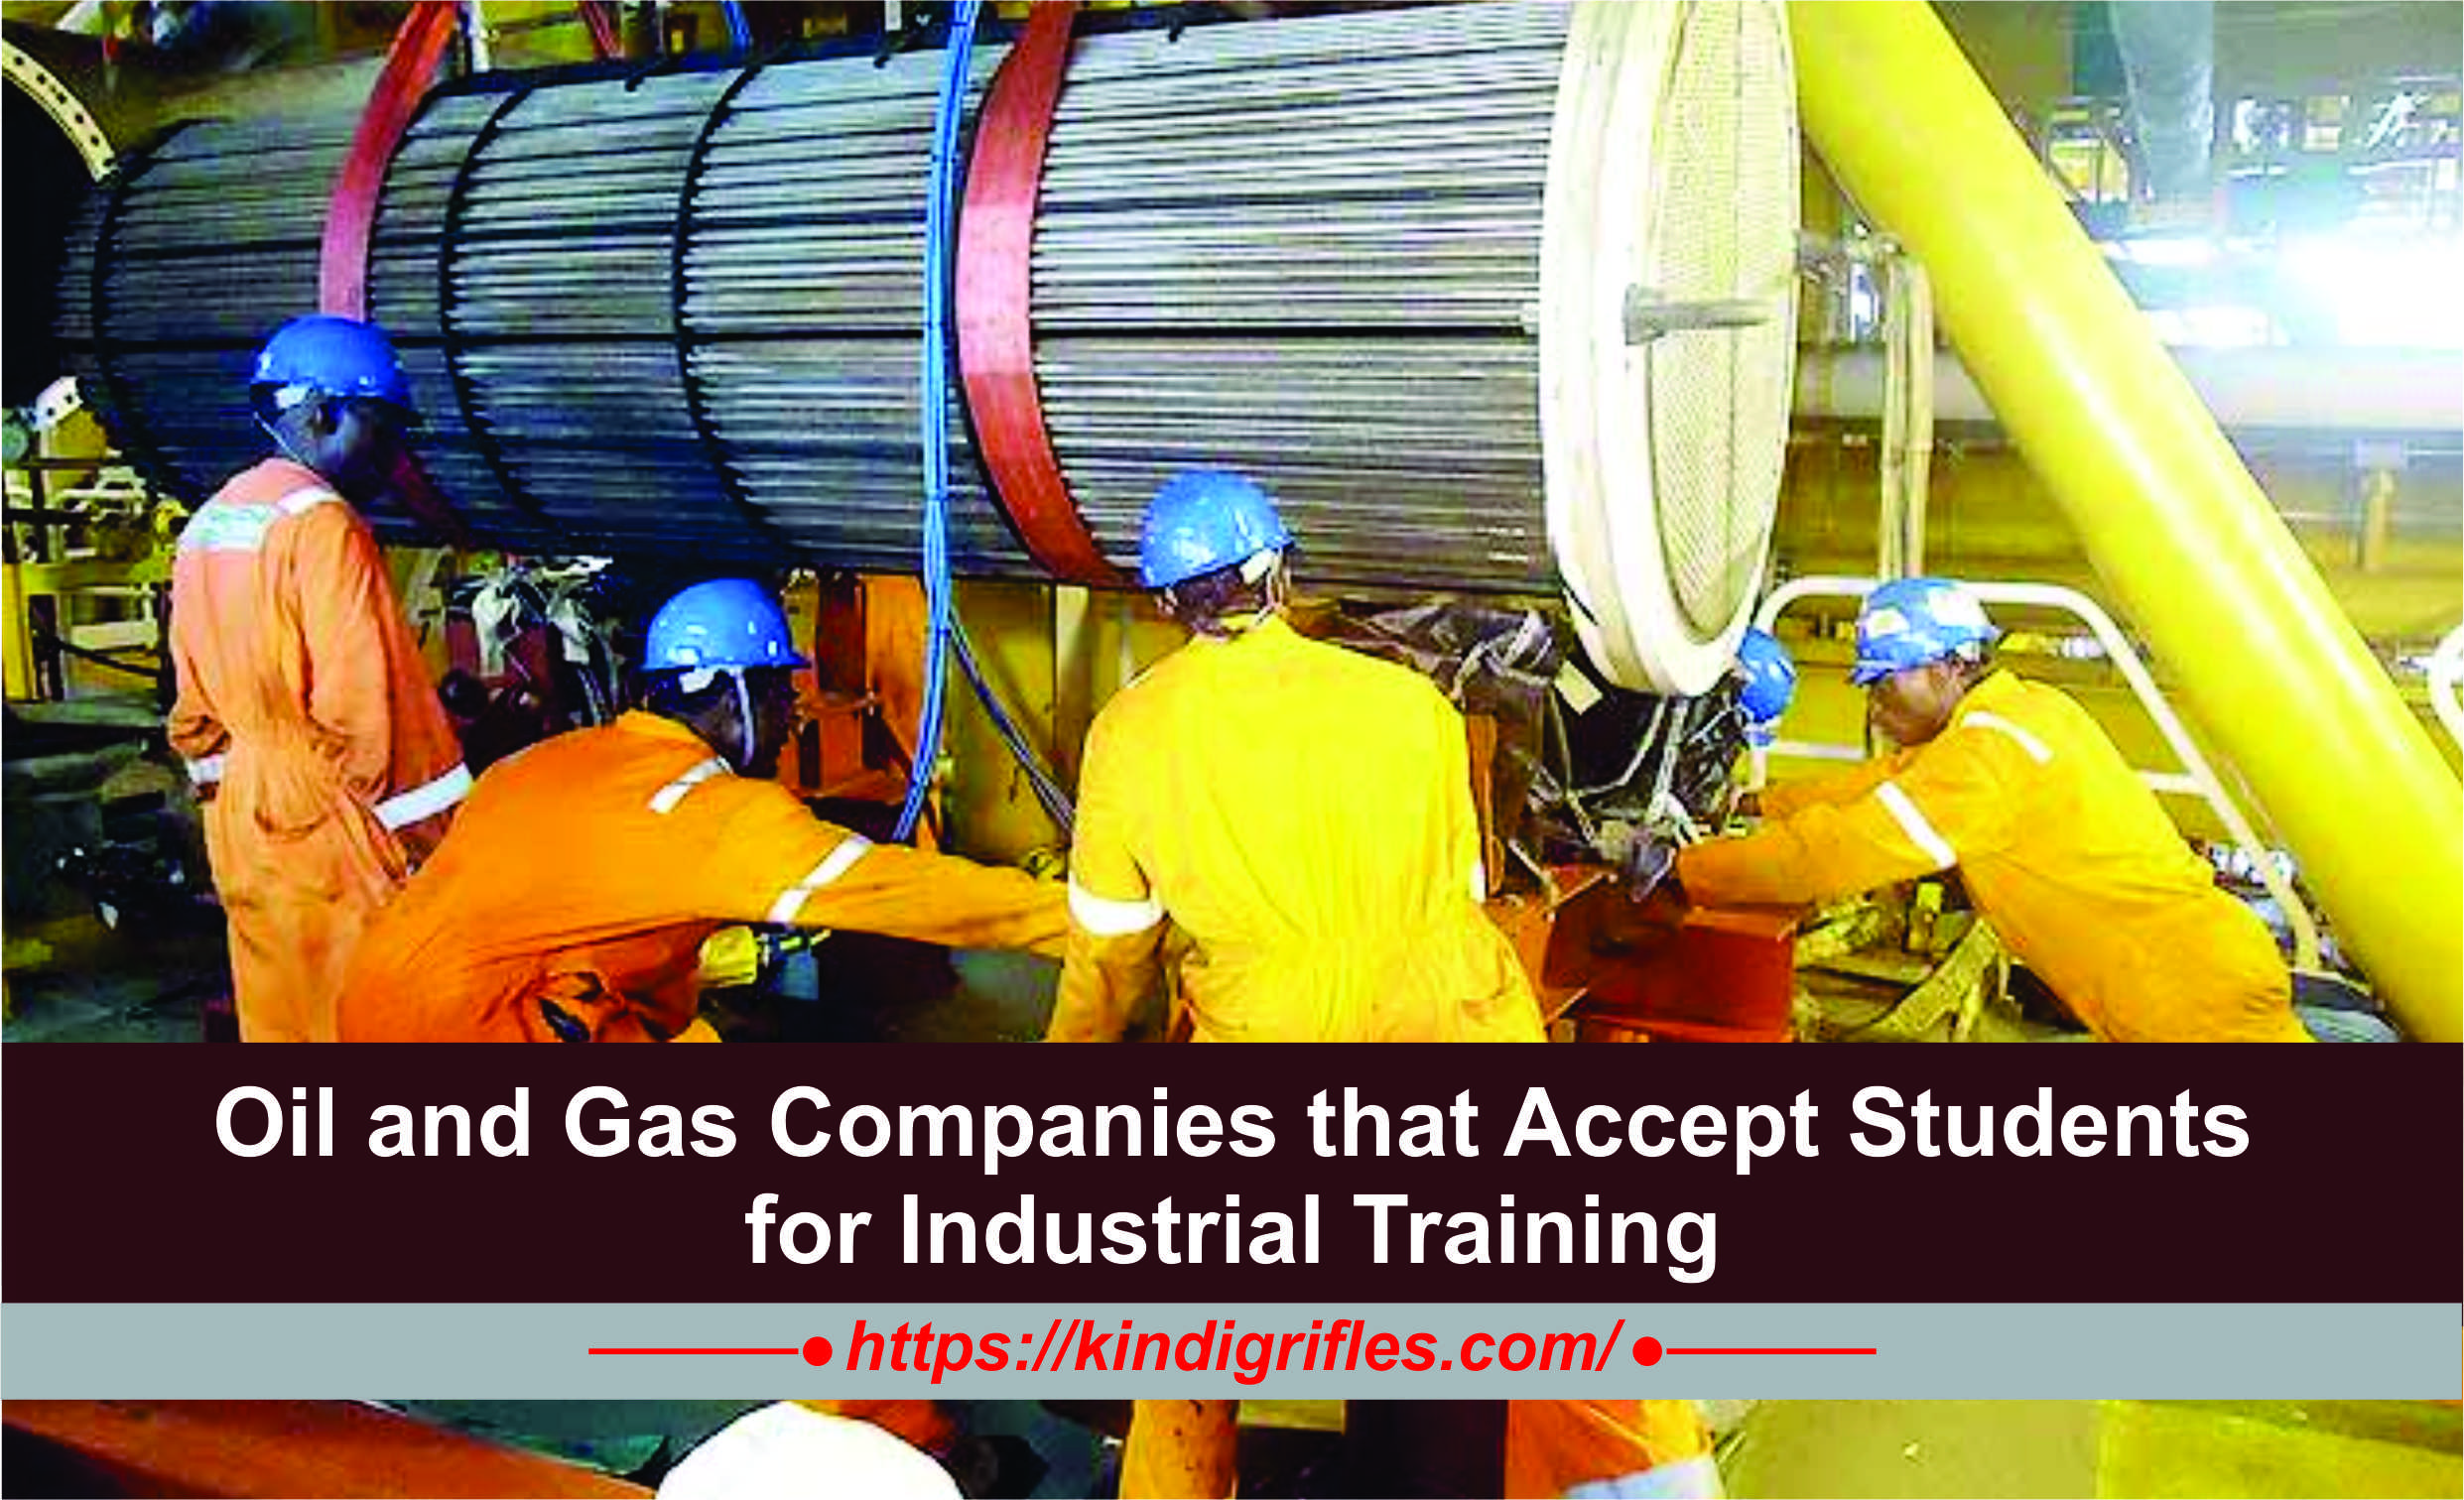 Oil and Gas Companies that Accept Students for Industrial Training